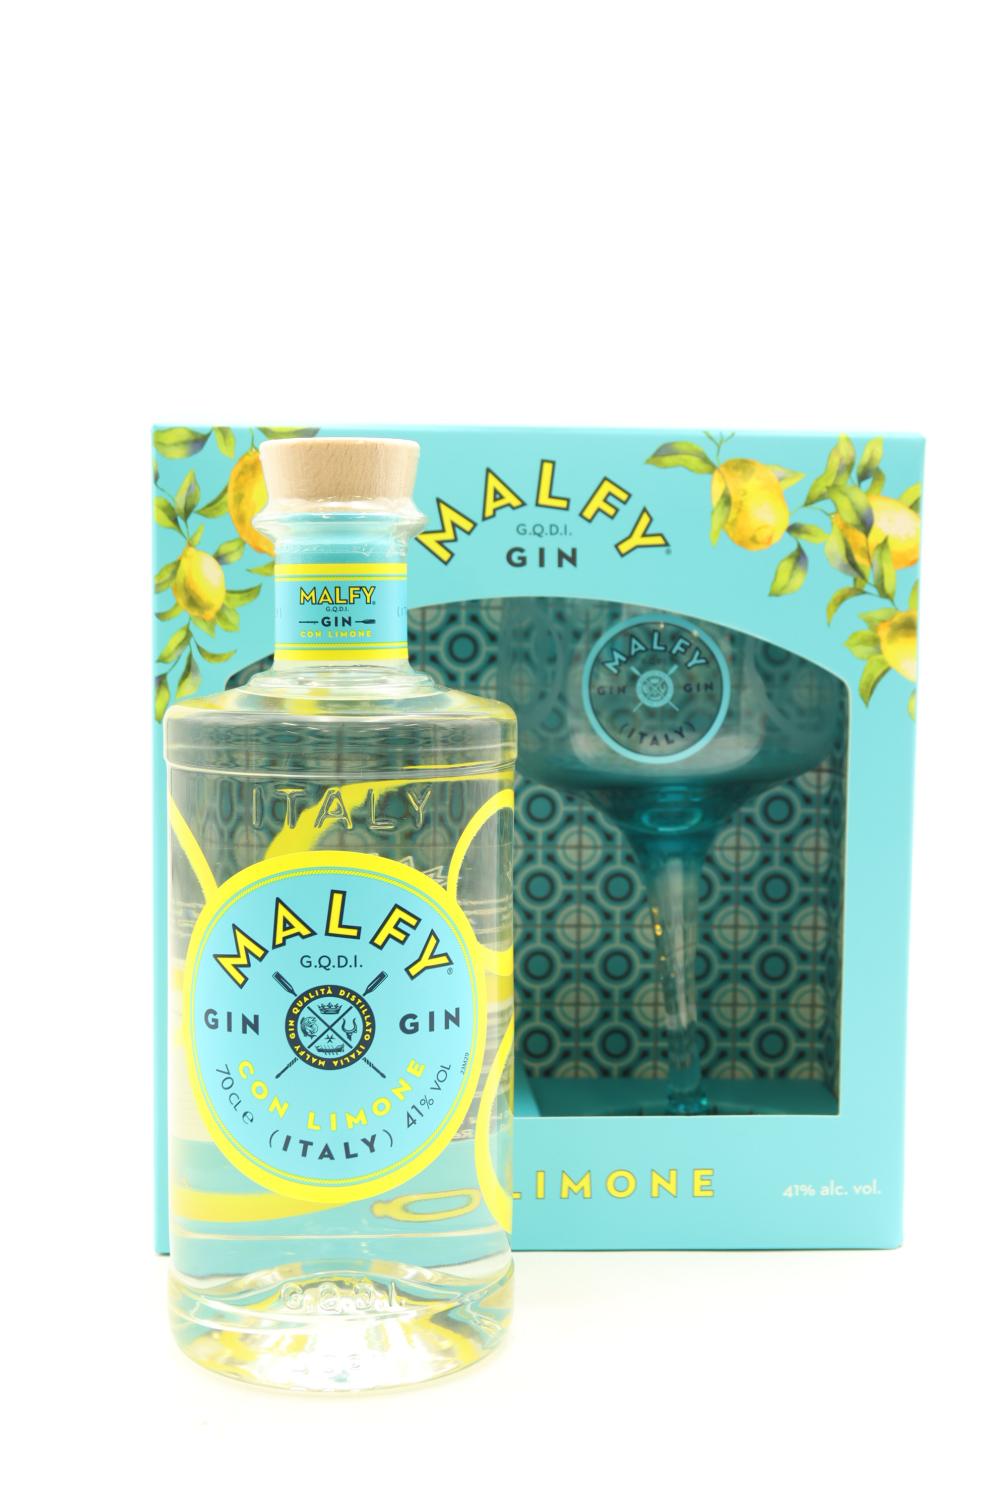 1) Malfy Con Gin, (GB) Limone 41% Gin Glass, a ABV With